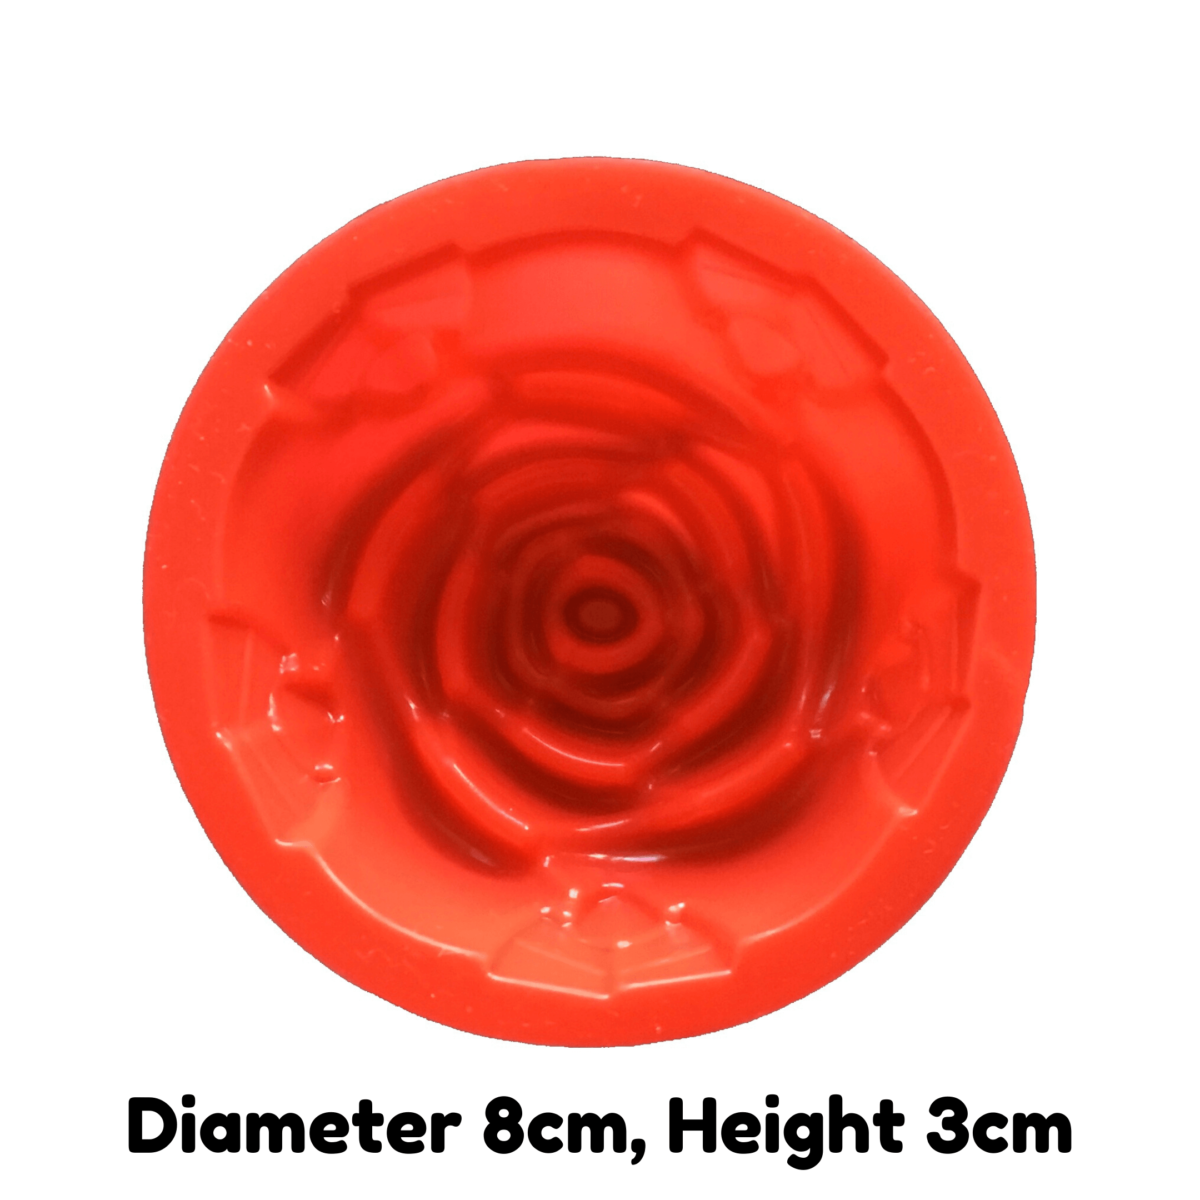 written dimensions of 8cm red rose single cavity silicone mould